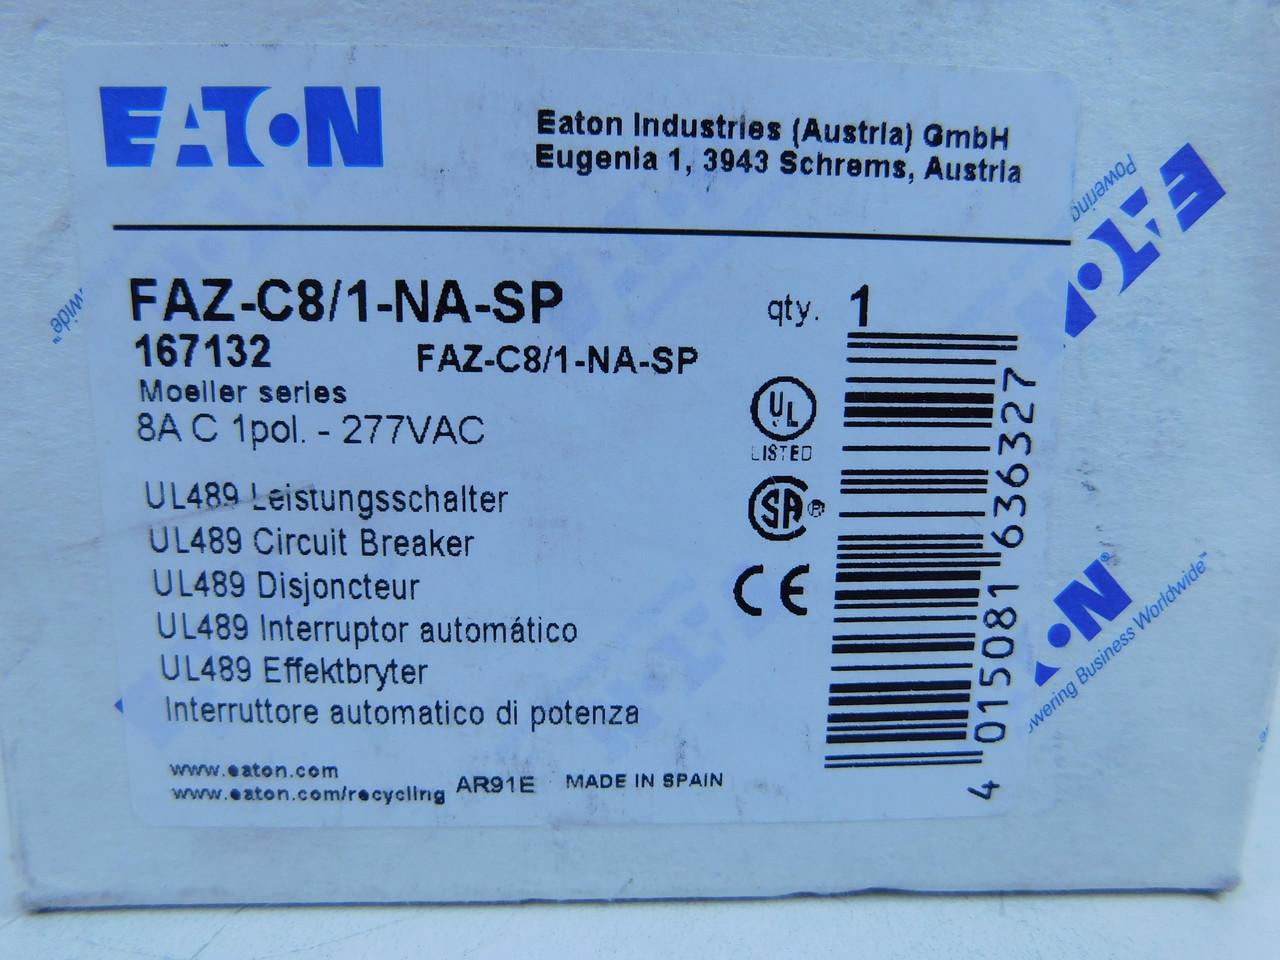 Eaton FAZ-C8/1-NA-SP Eaton FAZ branch protector,UL 489 Industrial miniature circuit breaker - supplementary protector,Single package,Medium levels of inrush current are expected,8 A,10 kAIC,Single-pole,277 V,5-10X /n,Q38,50-60 Hz,Screw terminals,C Curve